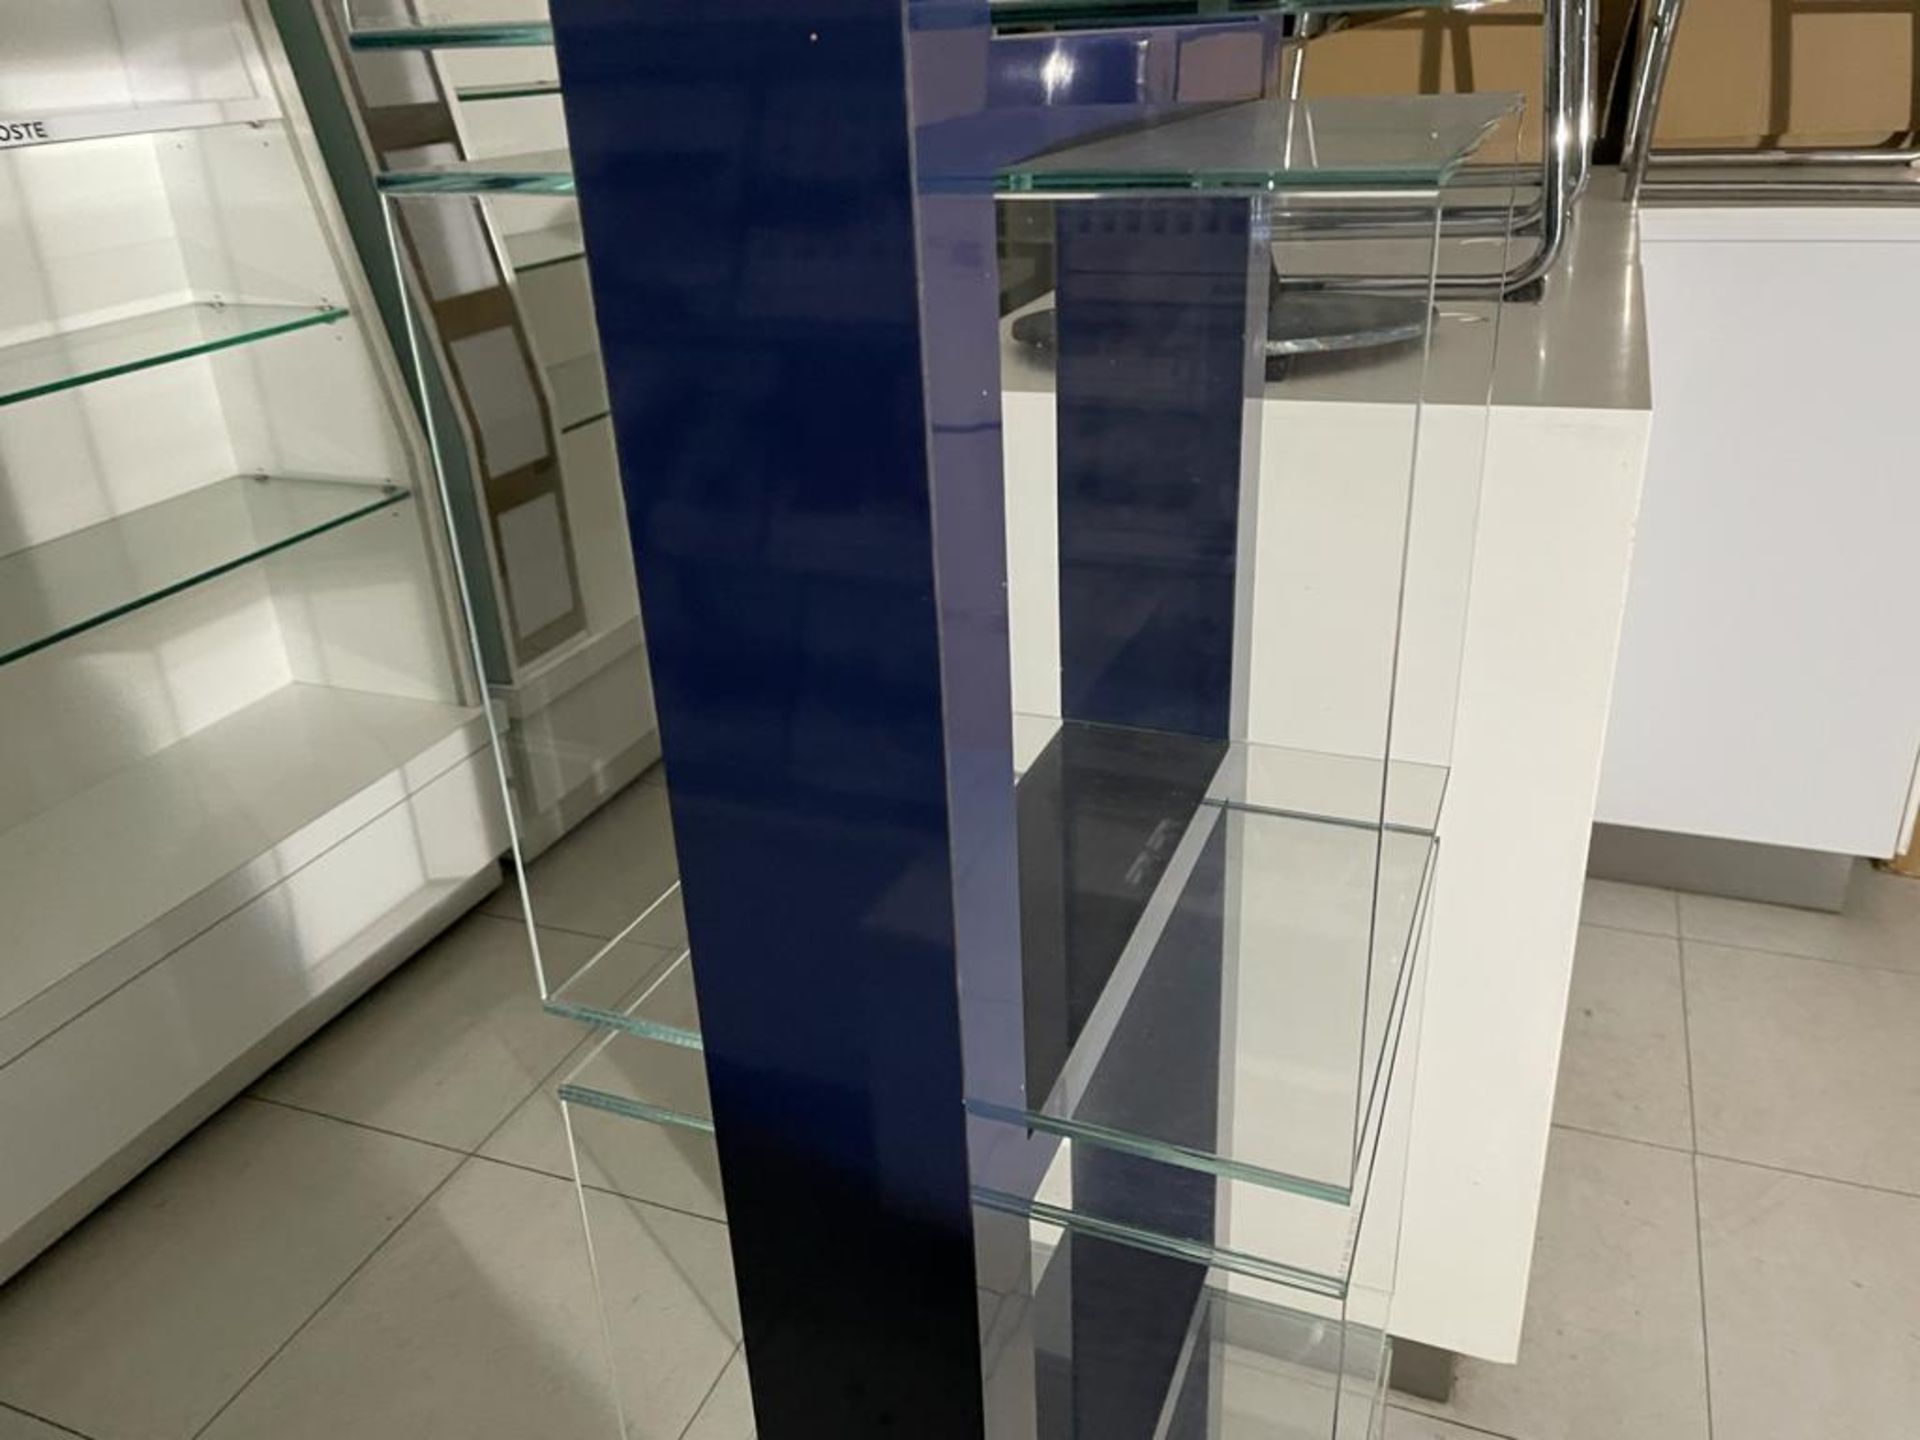 1 x Estee Lauder Free Standing Retail Display Unit With Glass Cube Display Shelves - Size H175 x W49 - Image 8 of 8